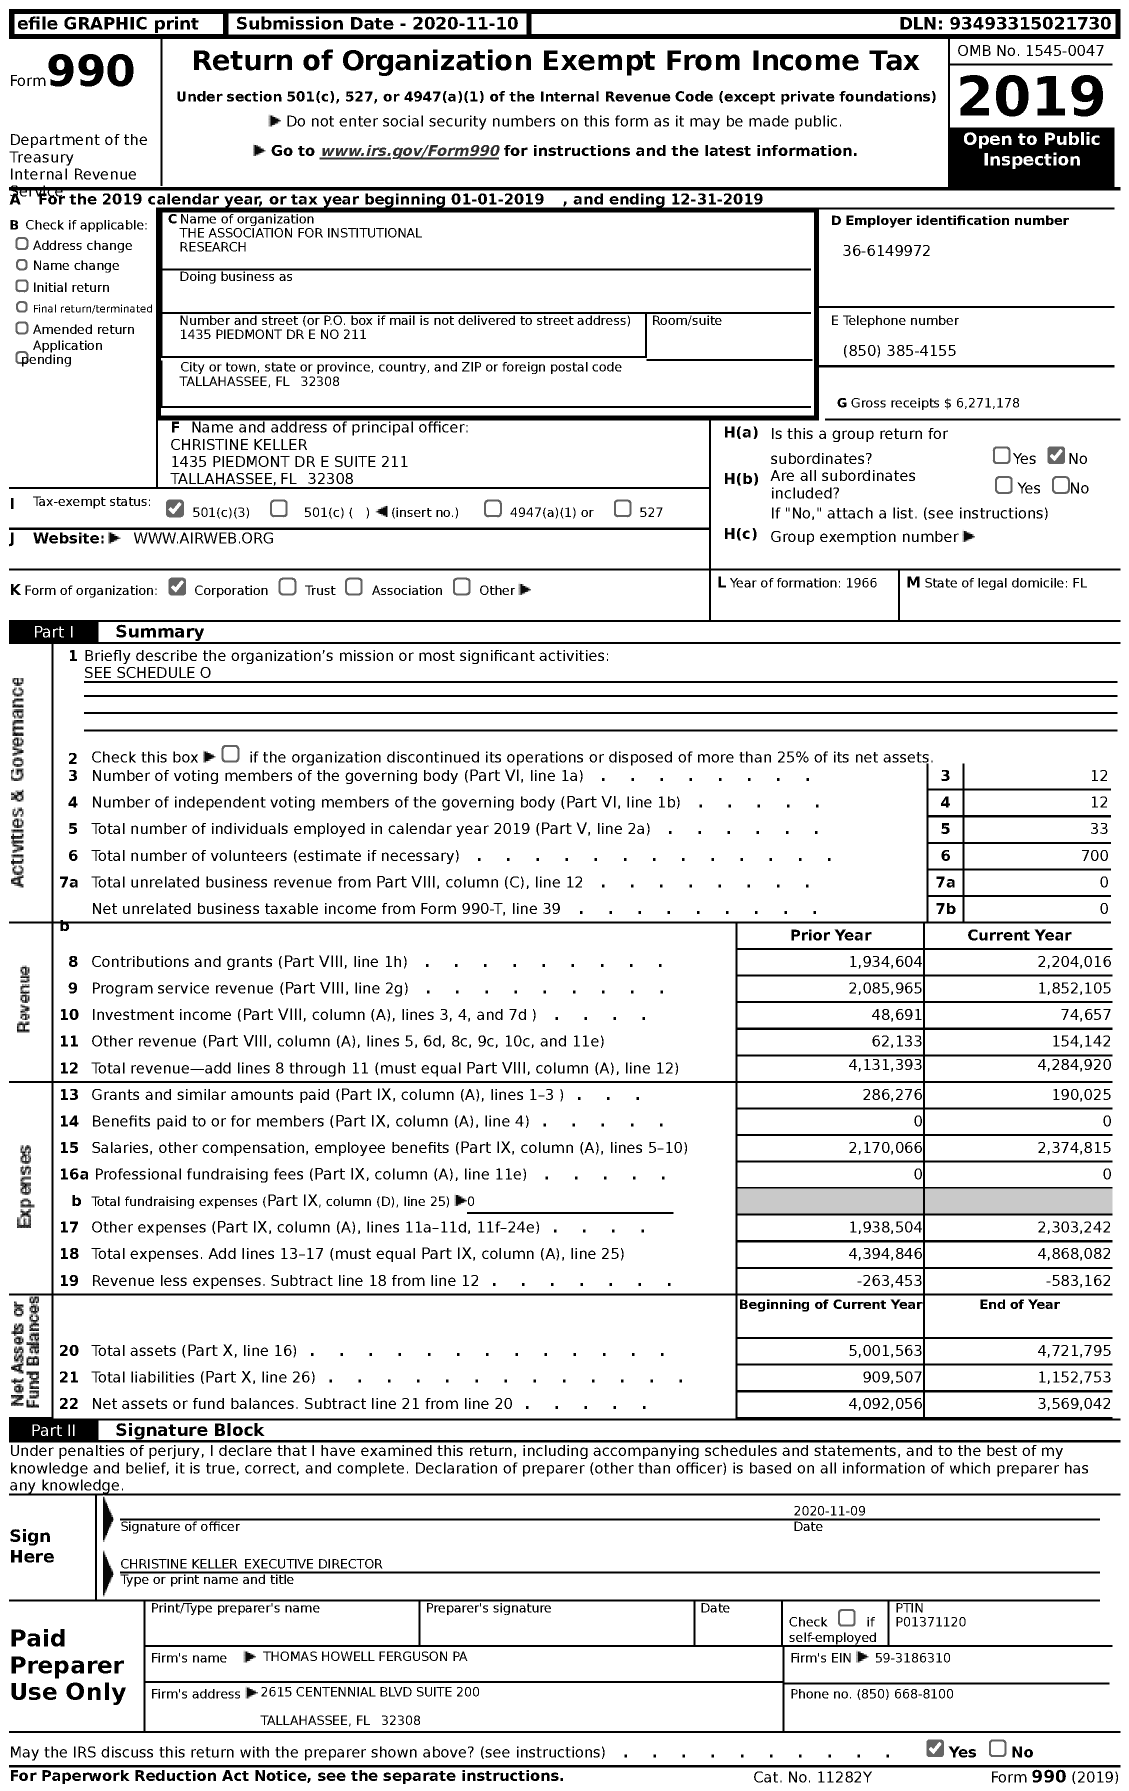 Image of first page of 2019 Form 990 for The Association for Institutional Research